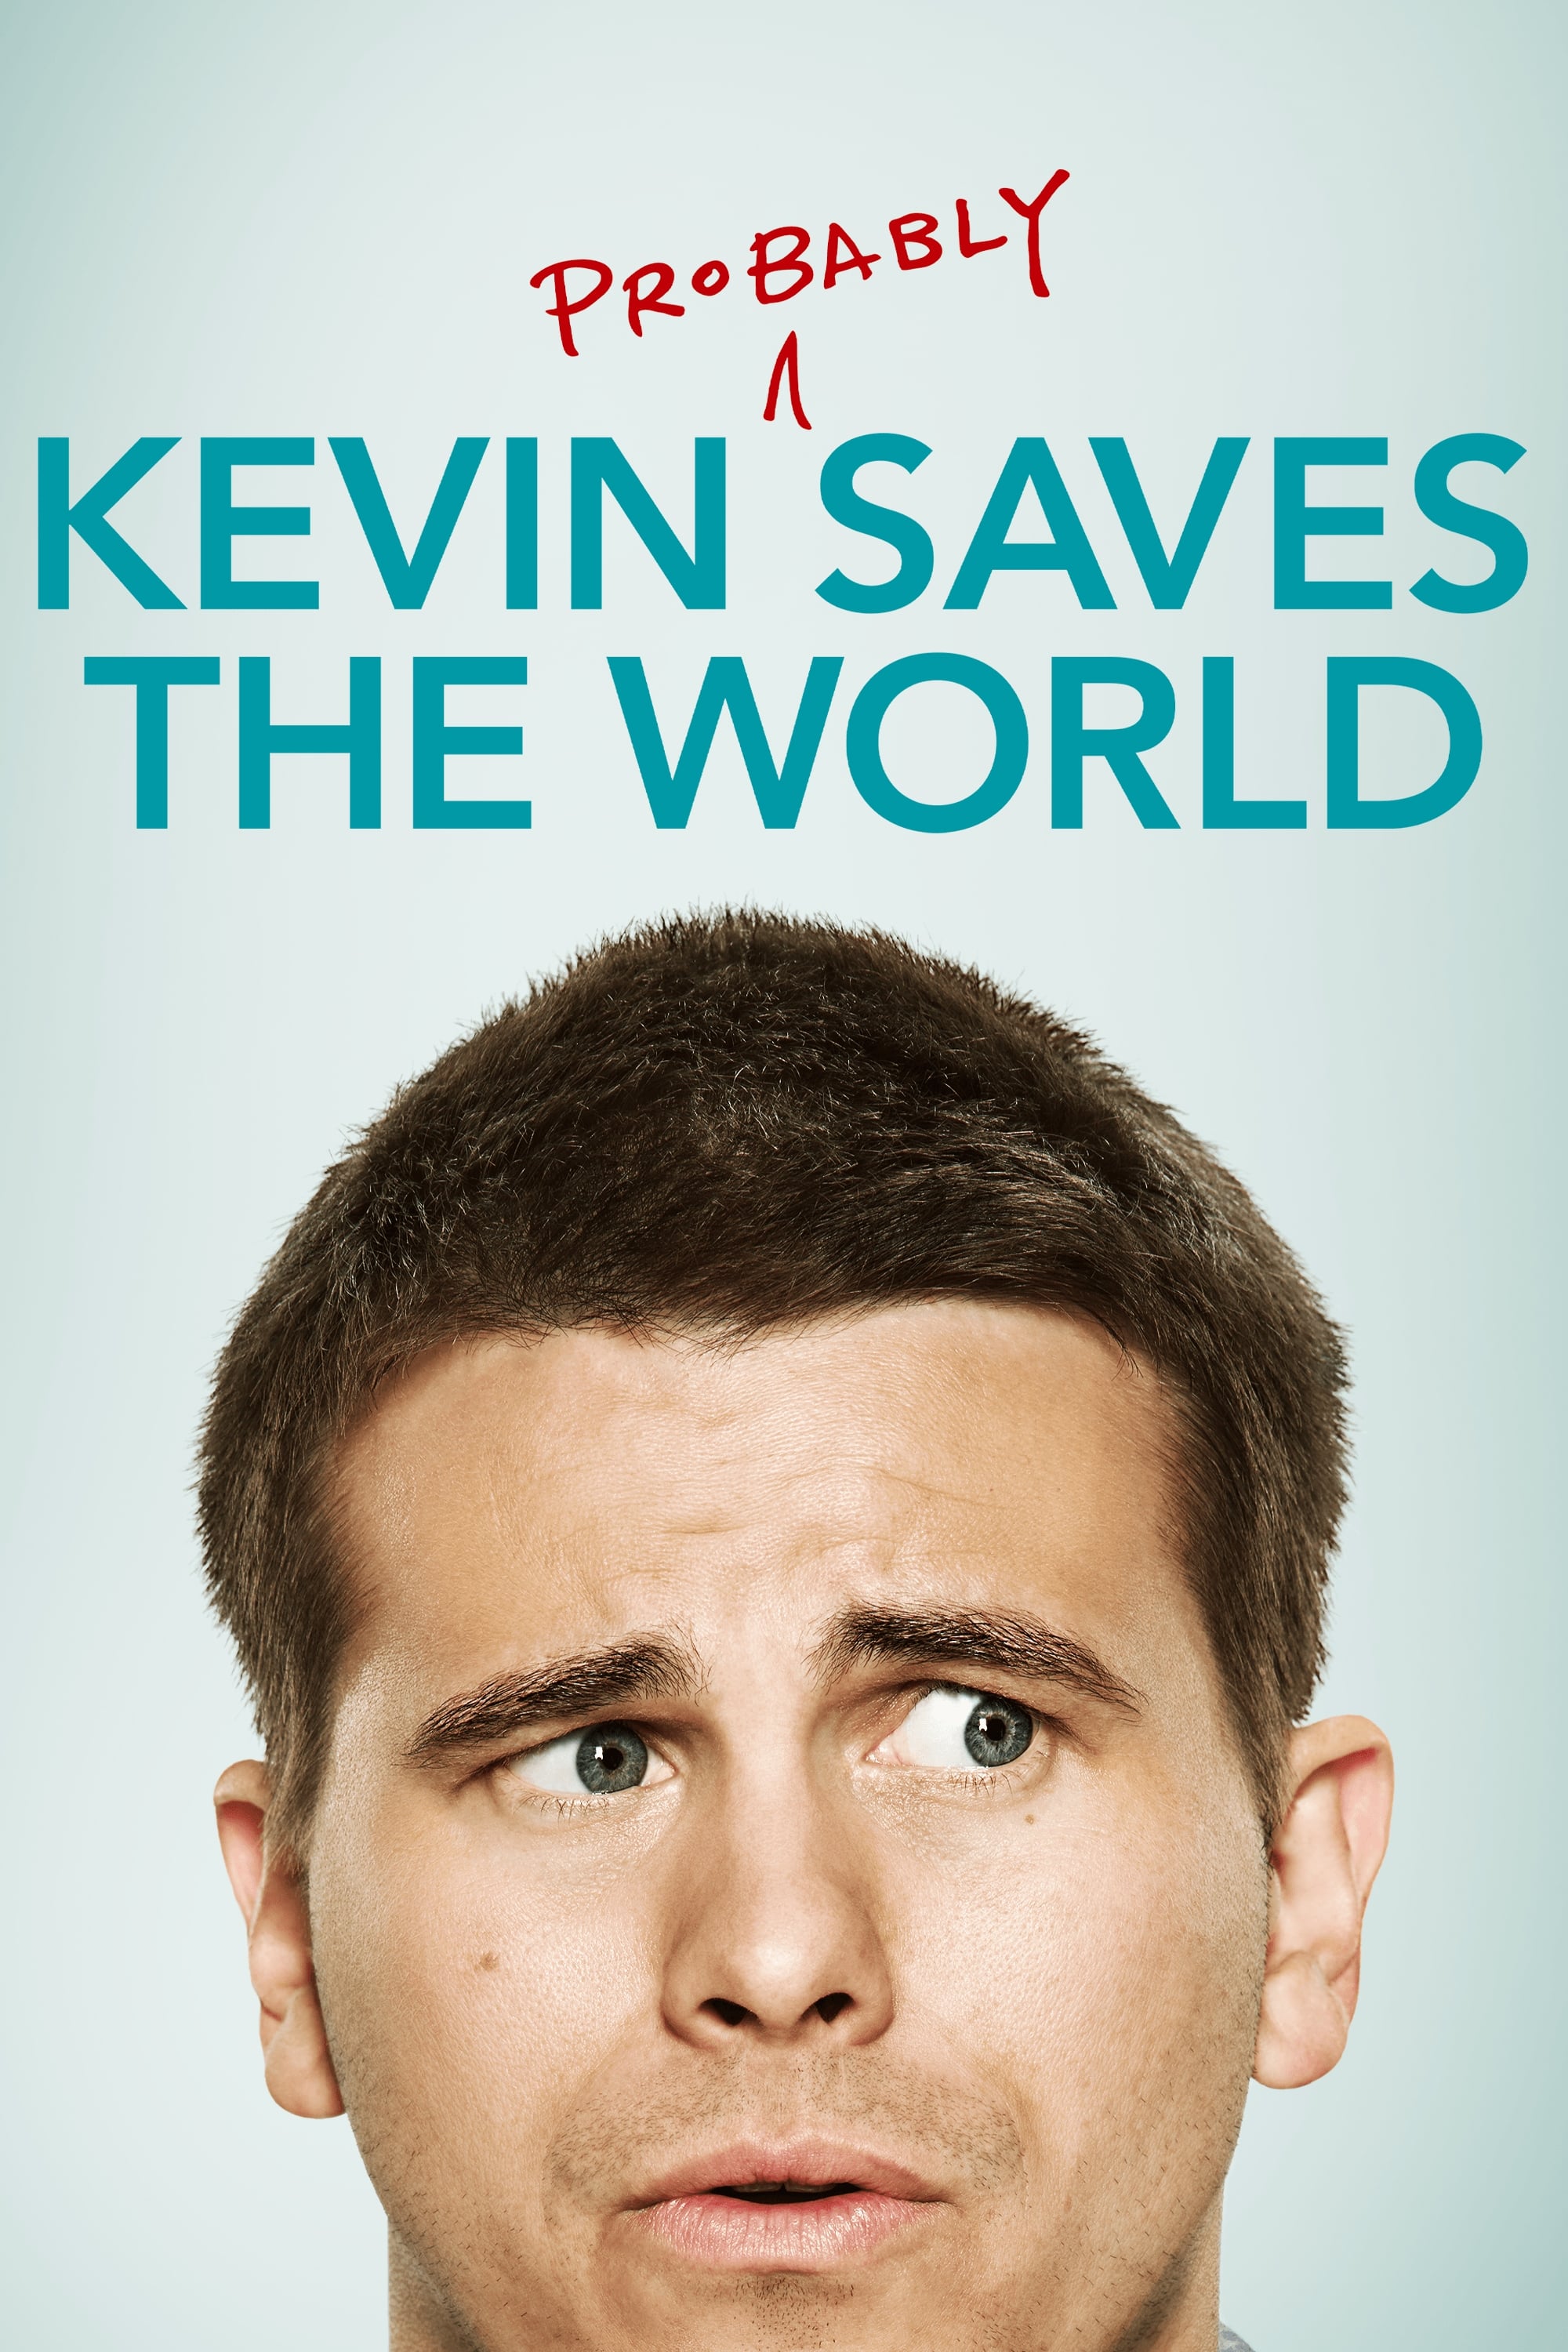 Kevin (Probably) Saves the World